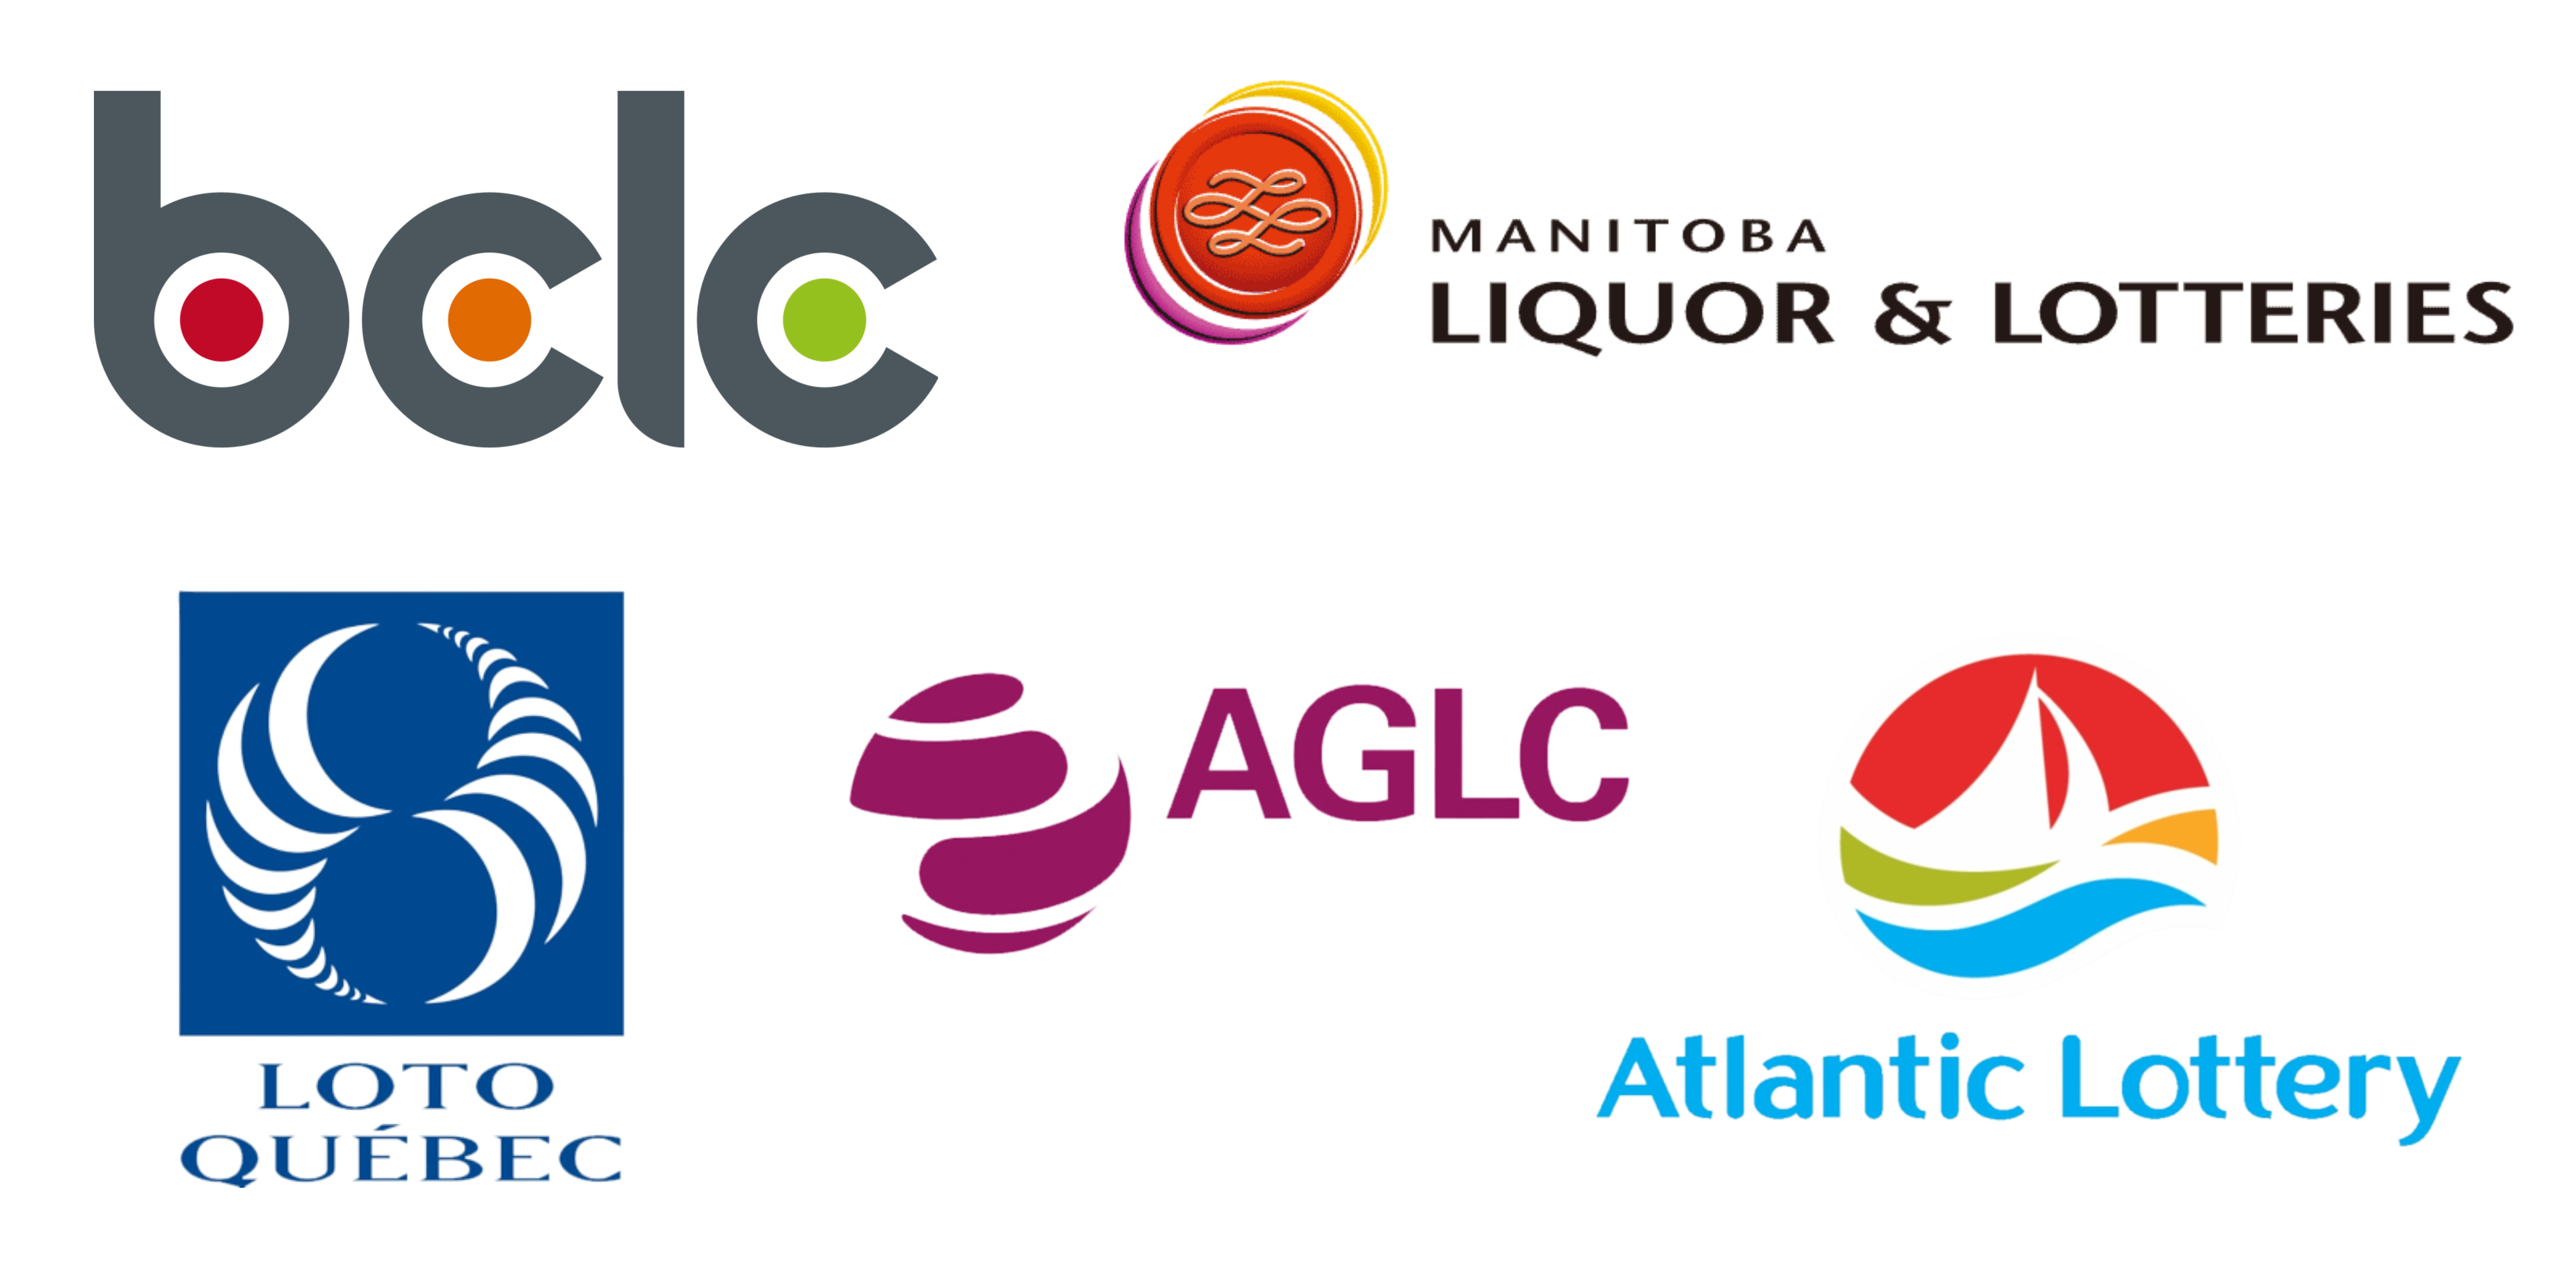 logos for the BCLC, Manitoba Liquor & Lotteries, Loto-Quebec, AGLC, Atlantic Lottery are seen on a white background